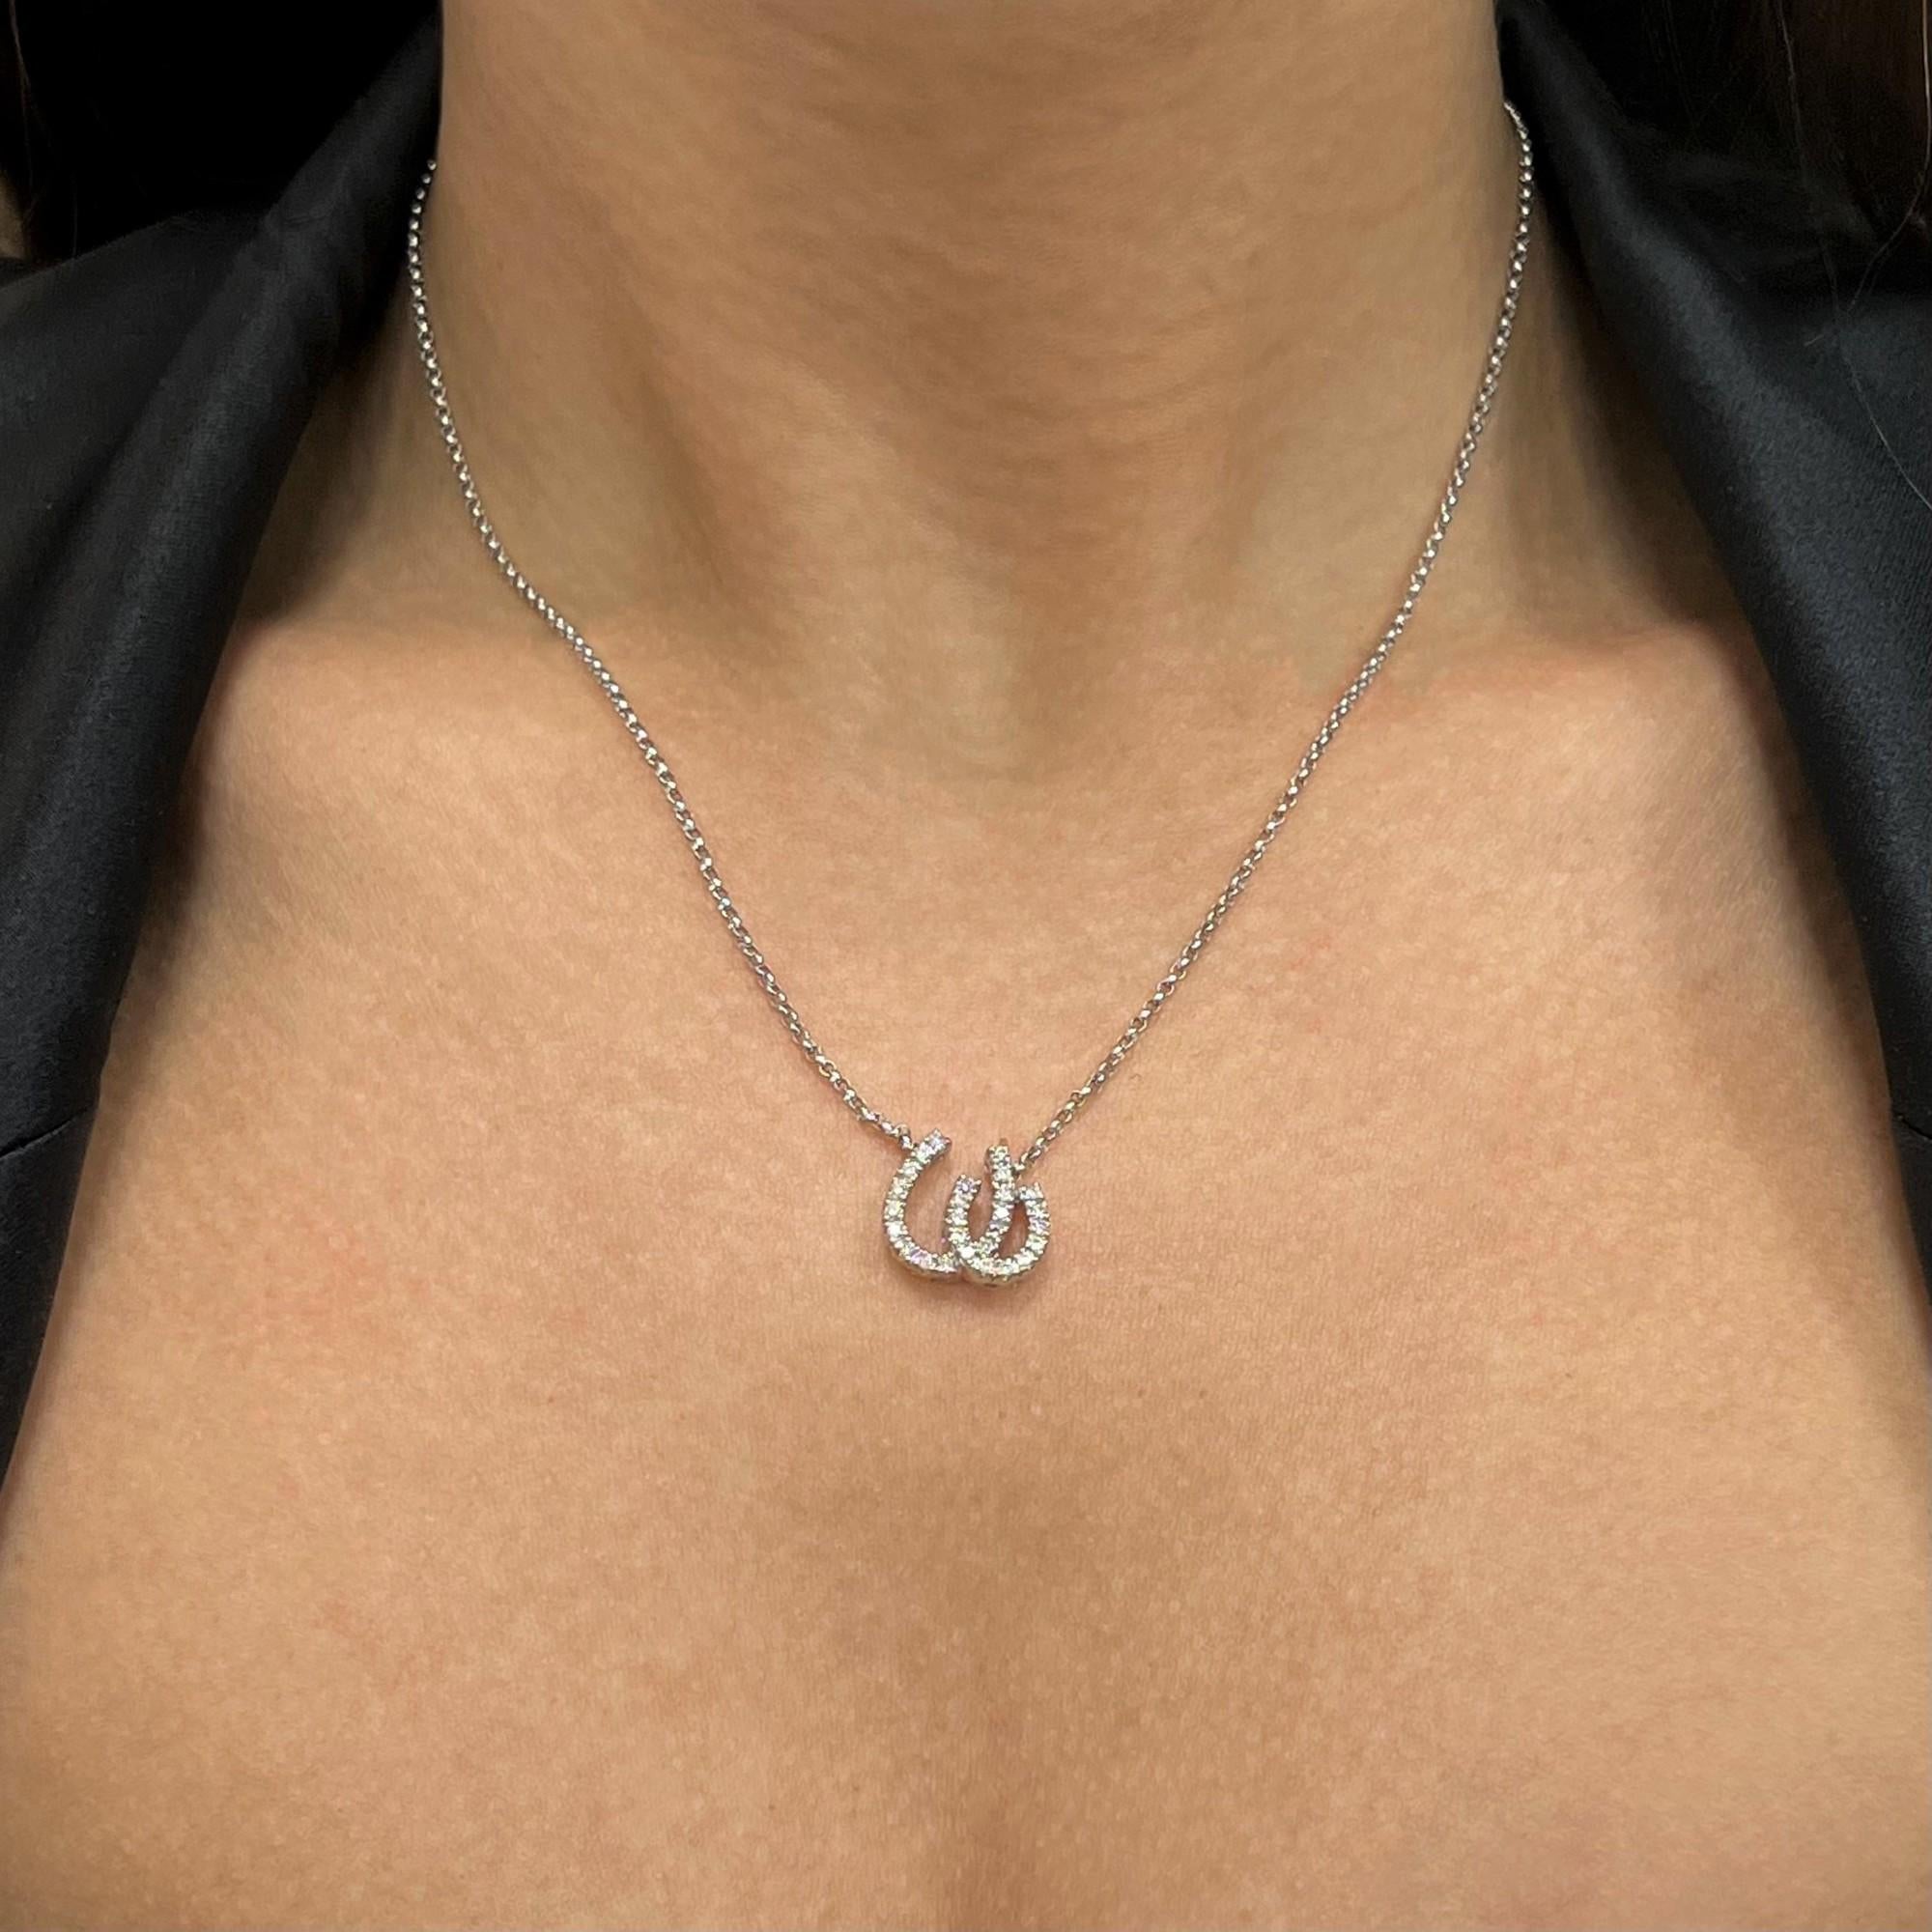 Rachel Koen Horseshoe Diamond Charm Pendant Necklace 14k White Gold 0.20Cttw In New Condition For Sale In New York, NY